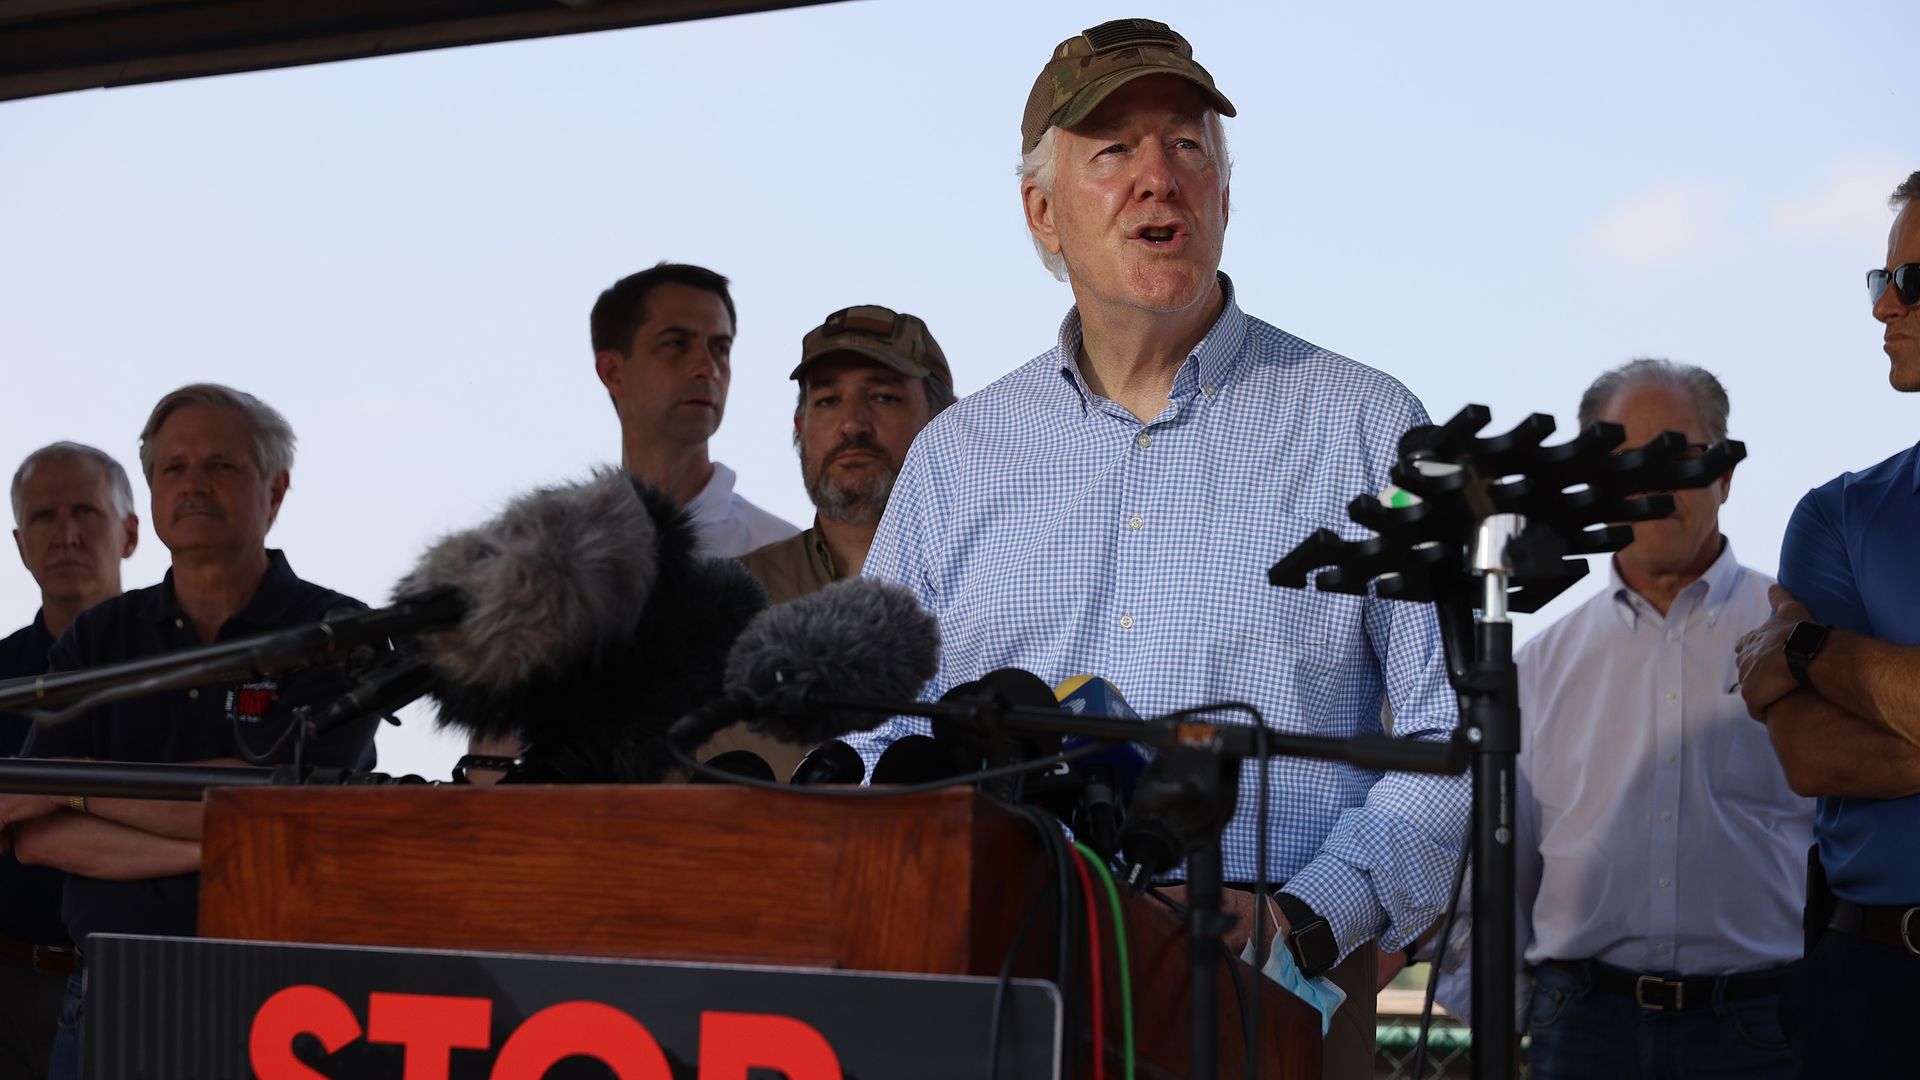 Sen. John Cornyn (R-TX) speaks to the media after a tour of part of the Rio Grande river 